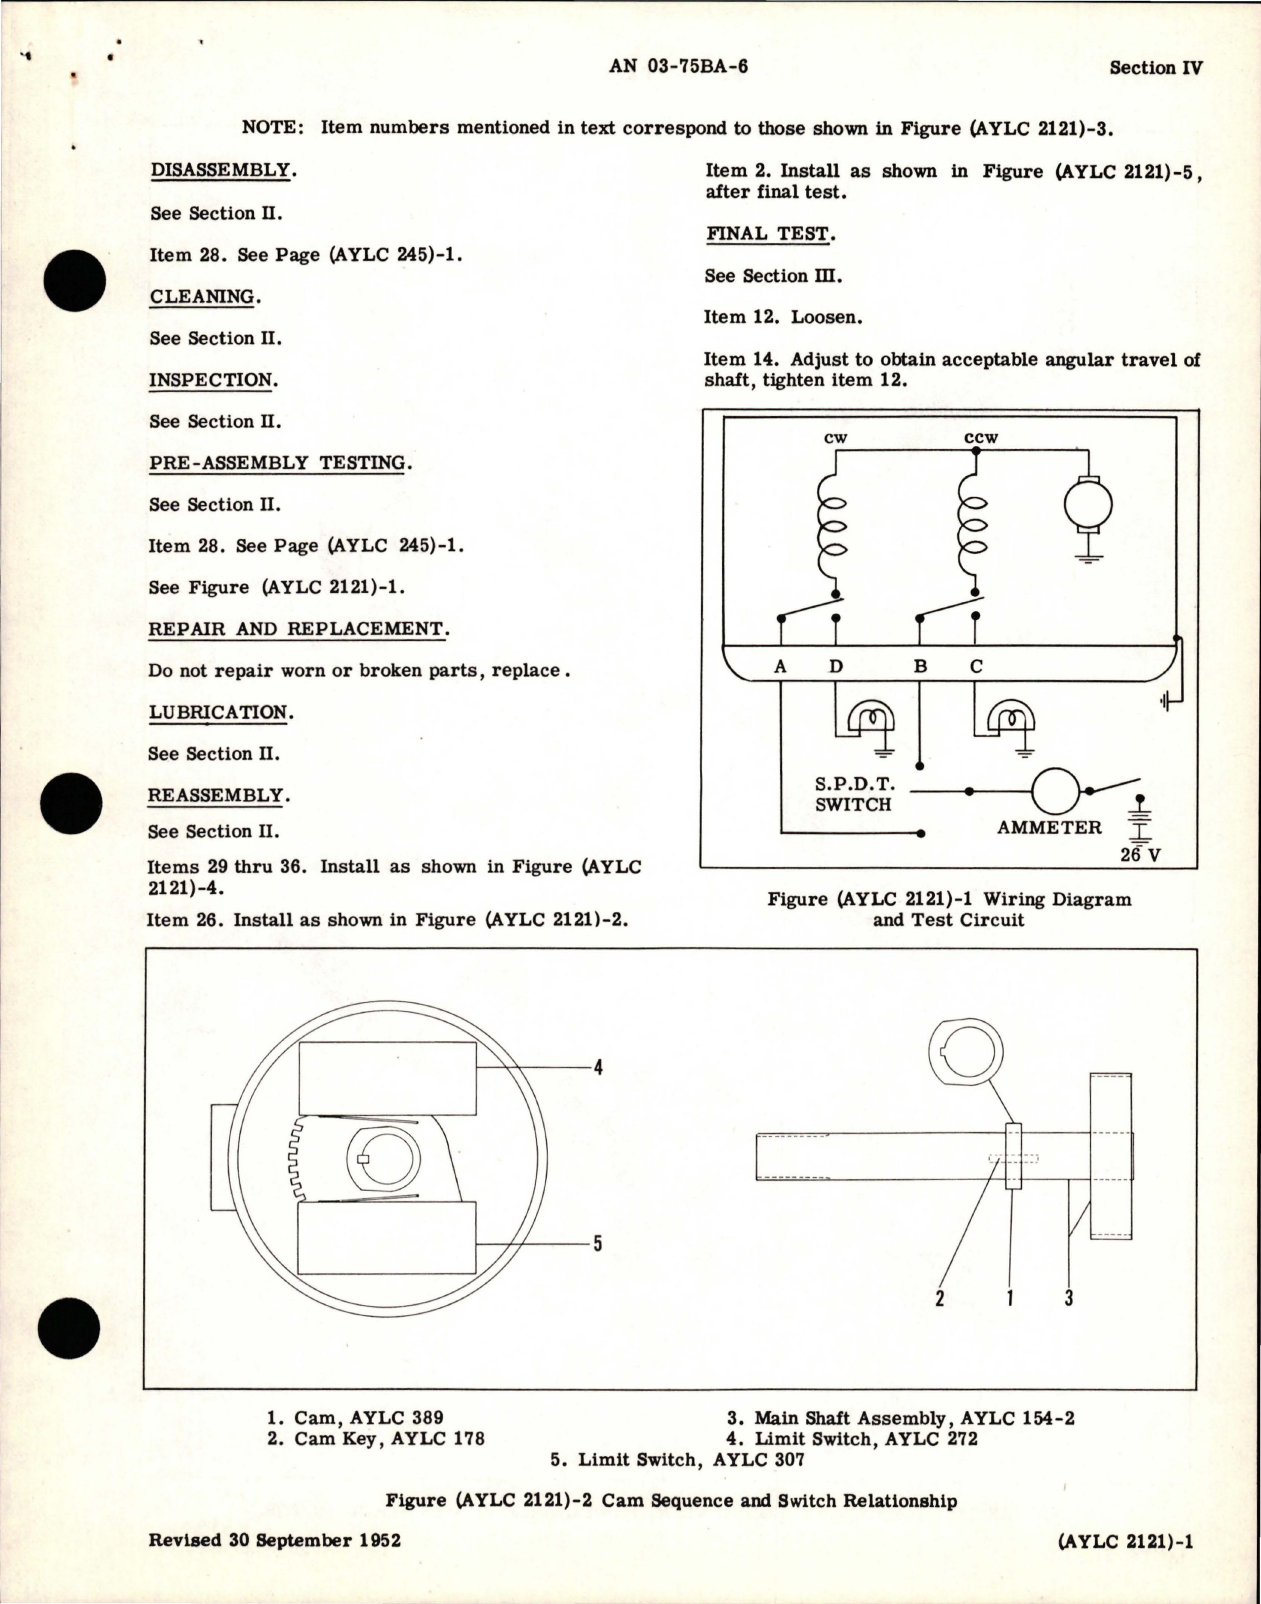 Sample page 5 from AirCorps Library document: Overhaul Instructions for Control Motors - Part AYLC Series 